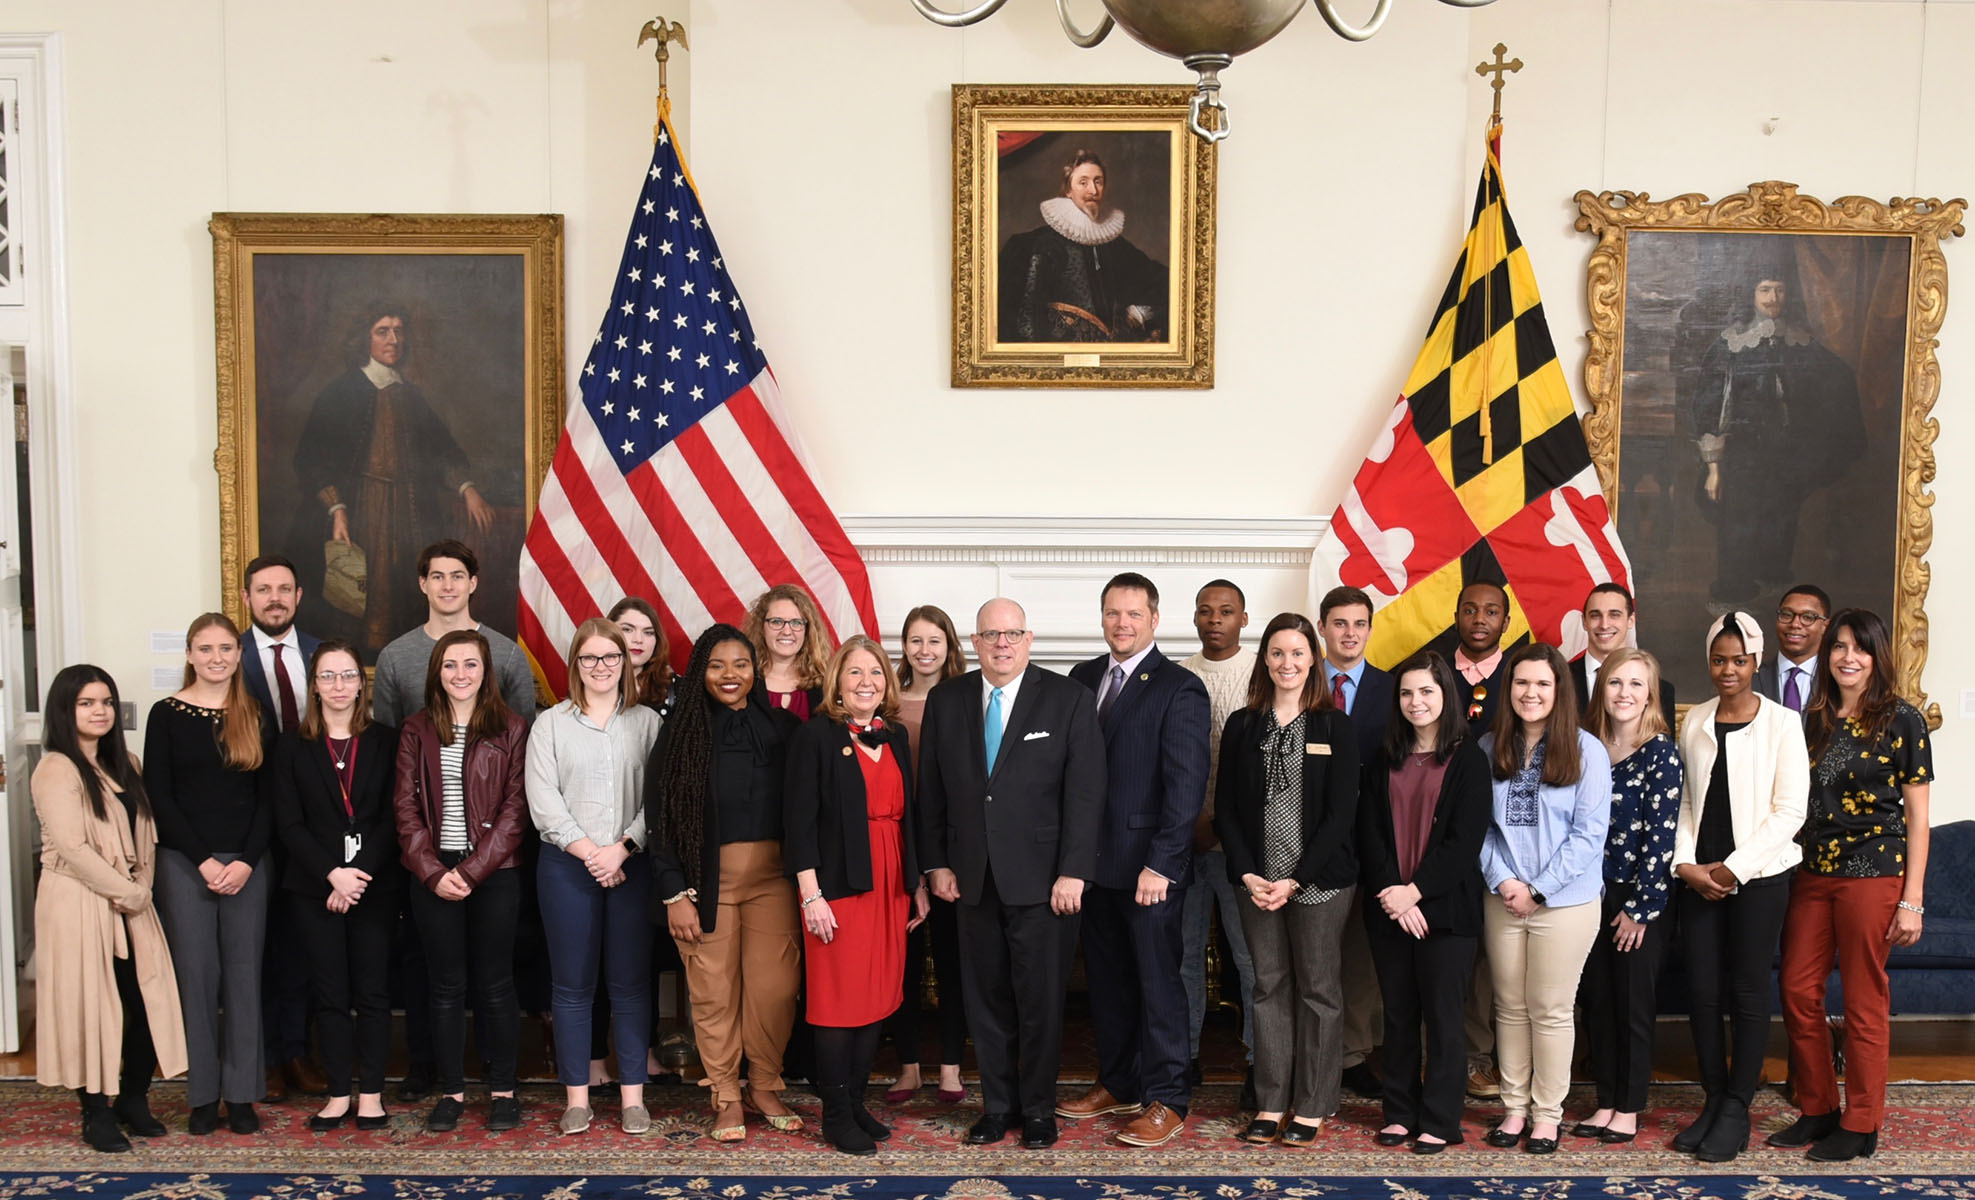 PACE students with elected officials